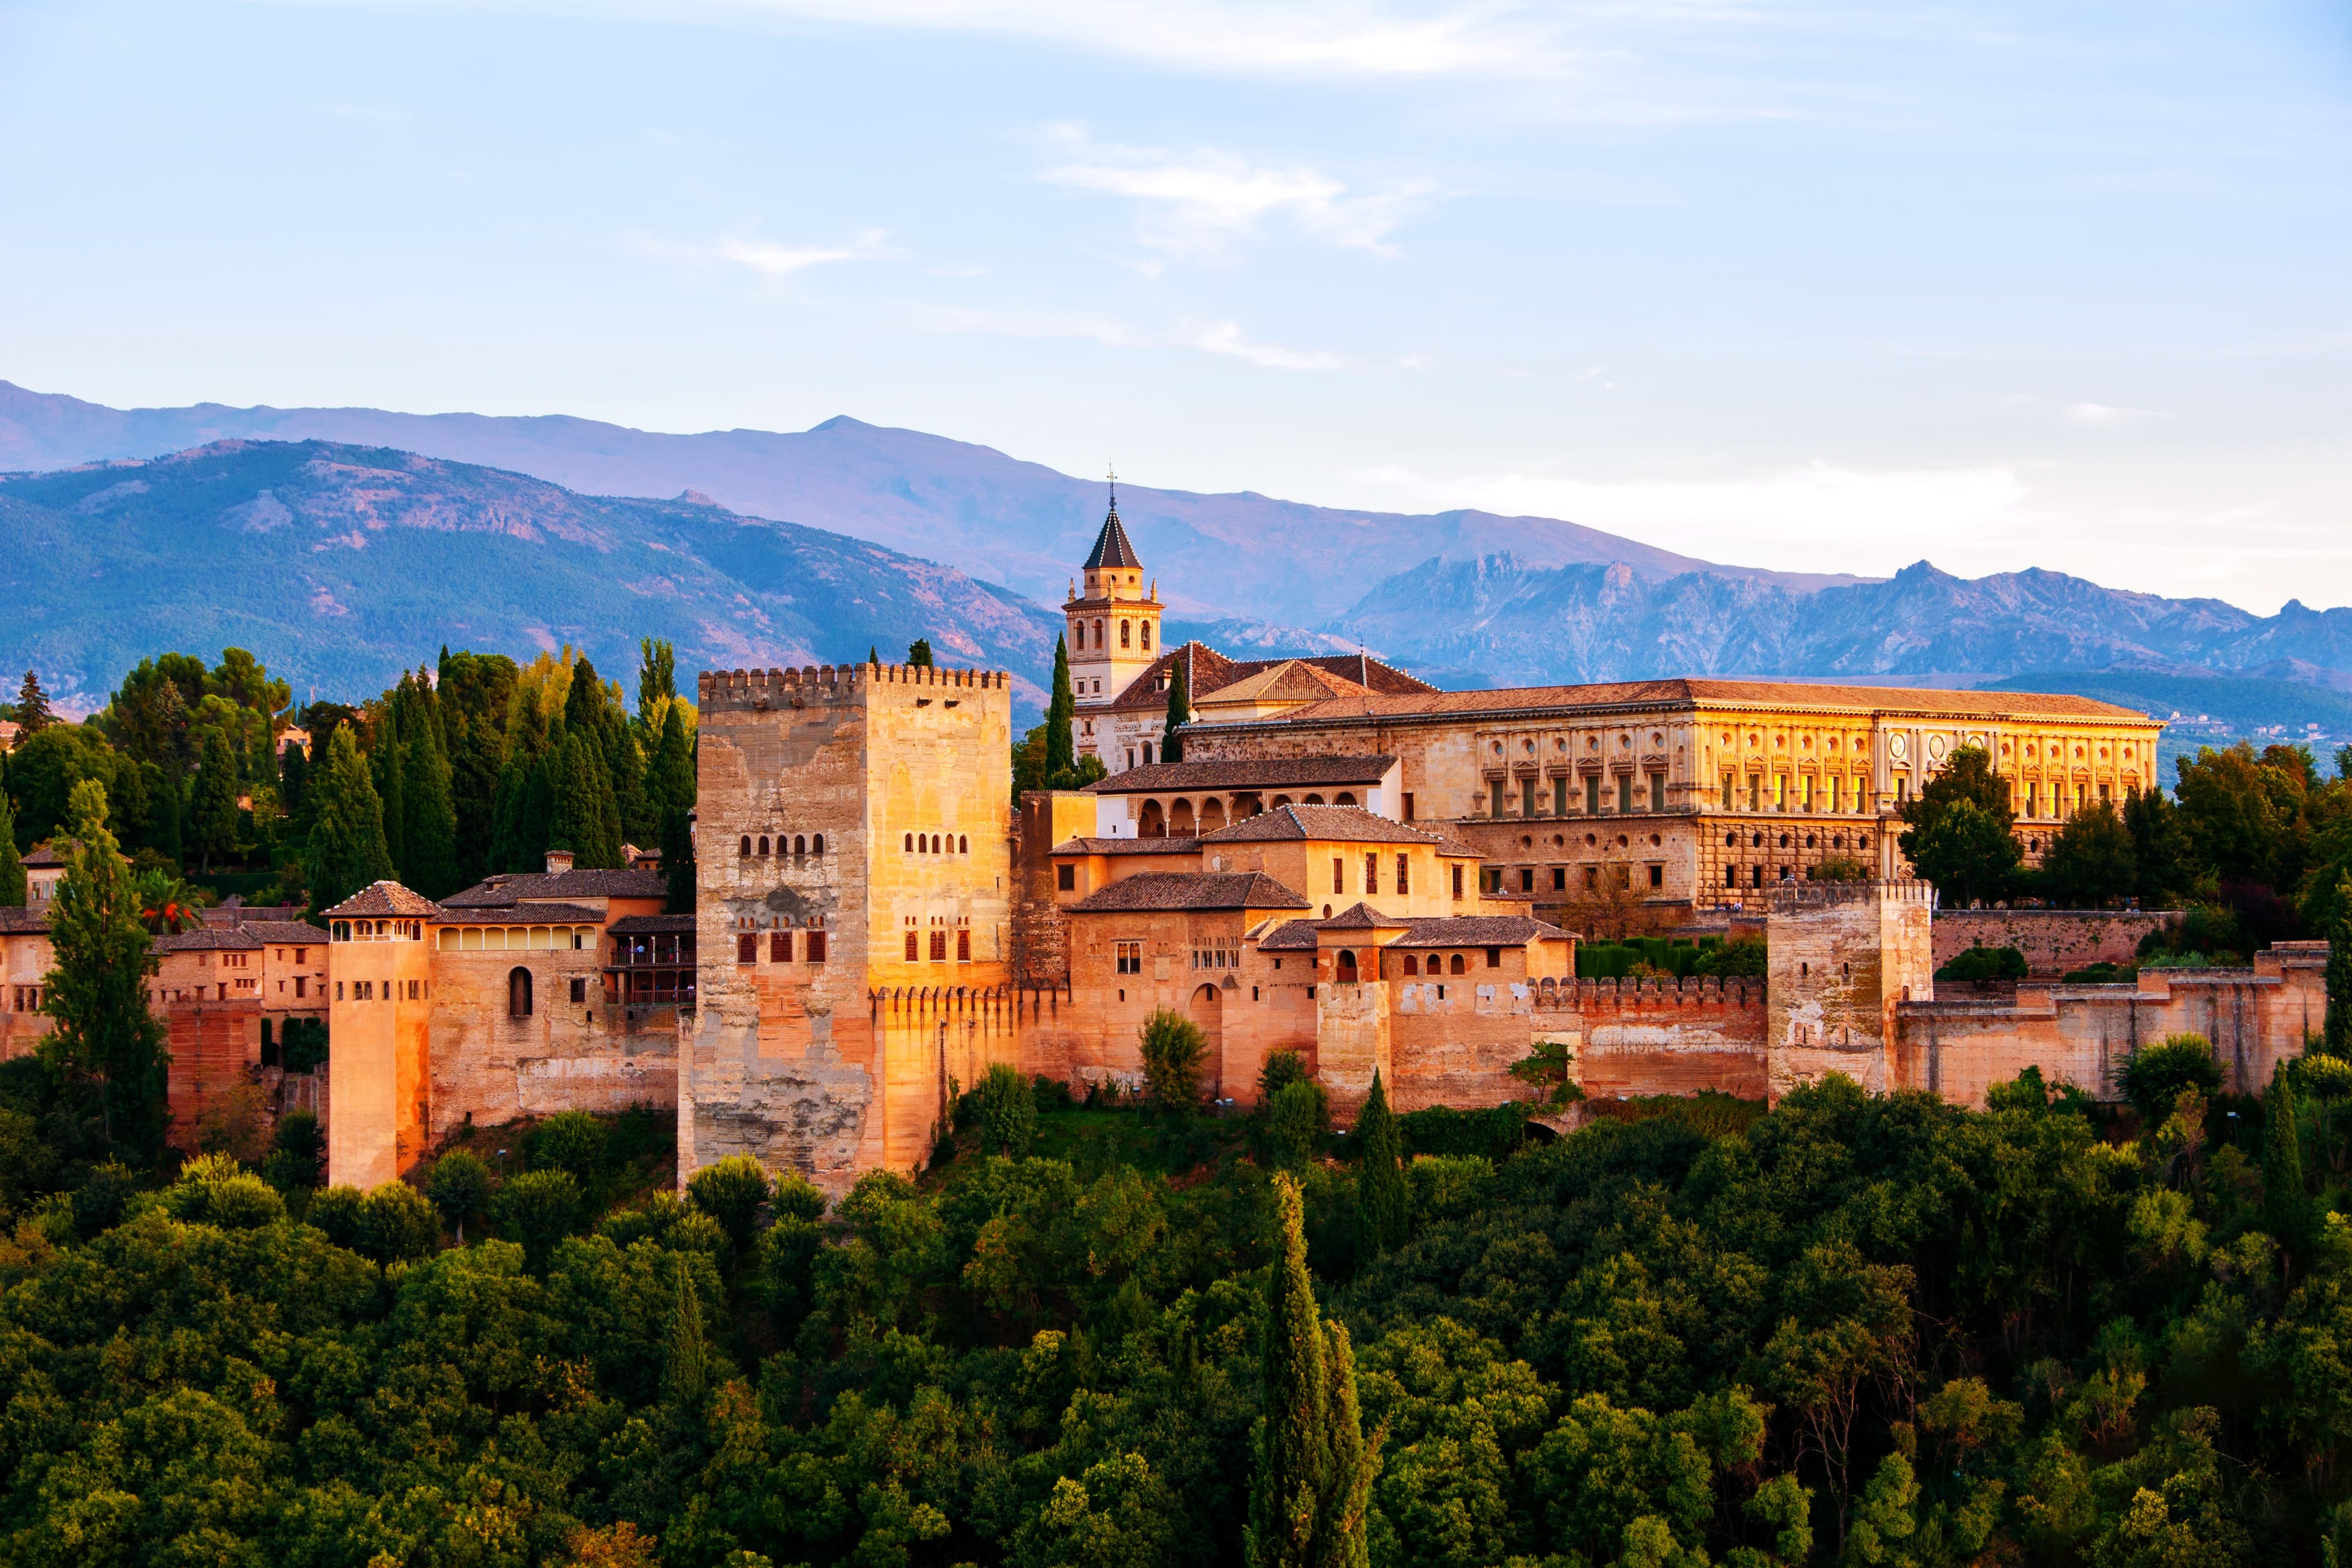 The ancient fortress Alhambra surrounded by forest in Granada, Spain